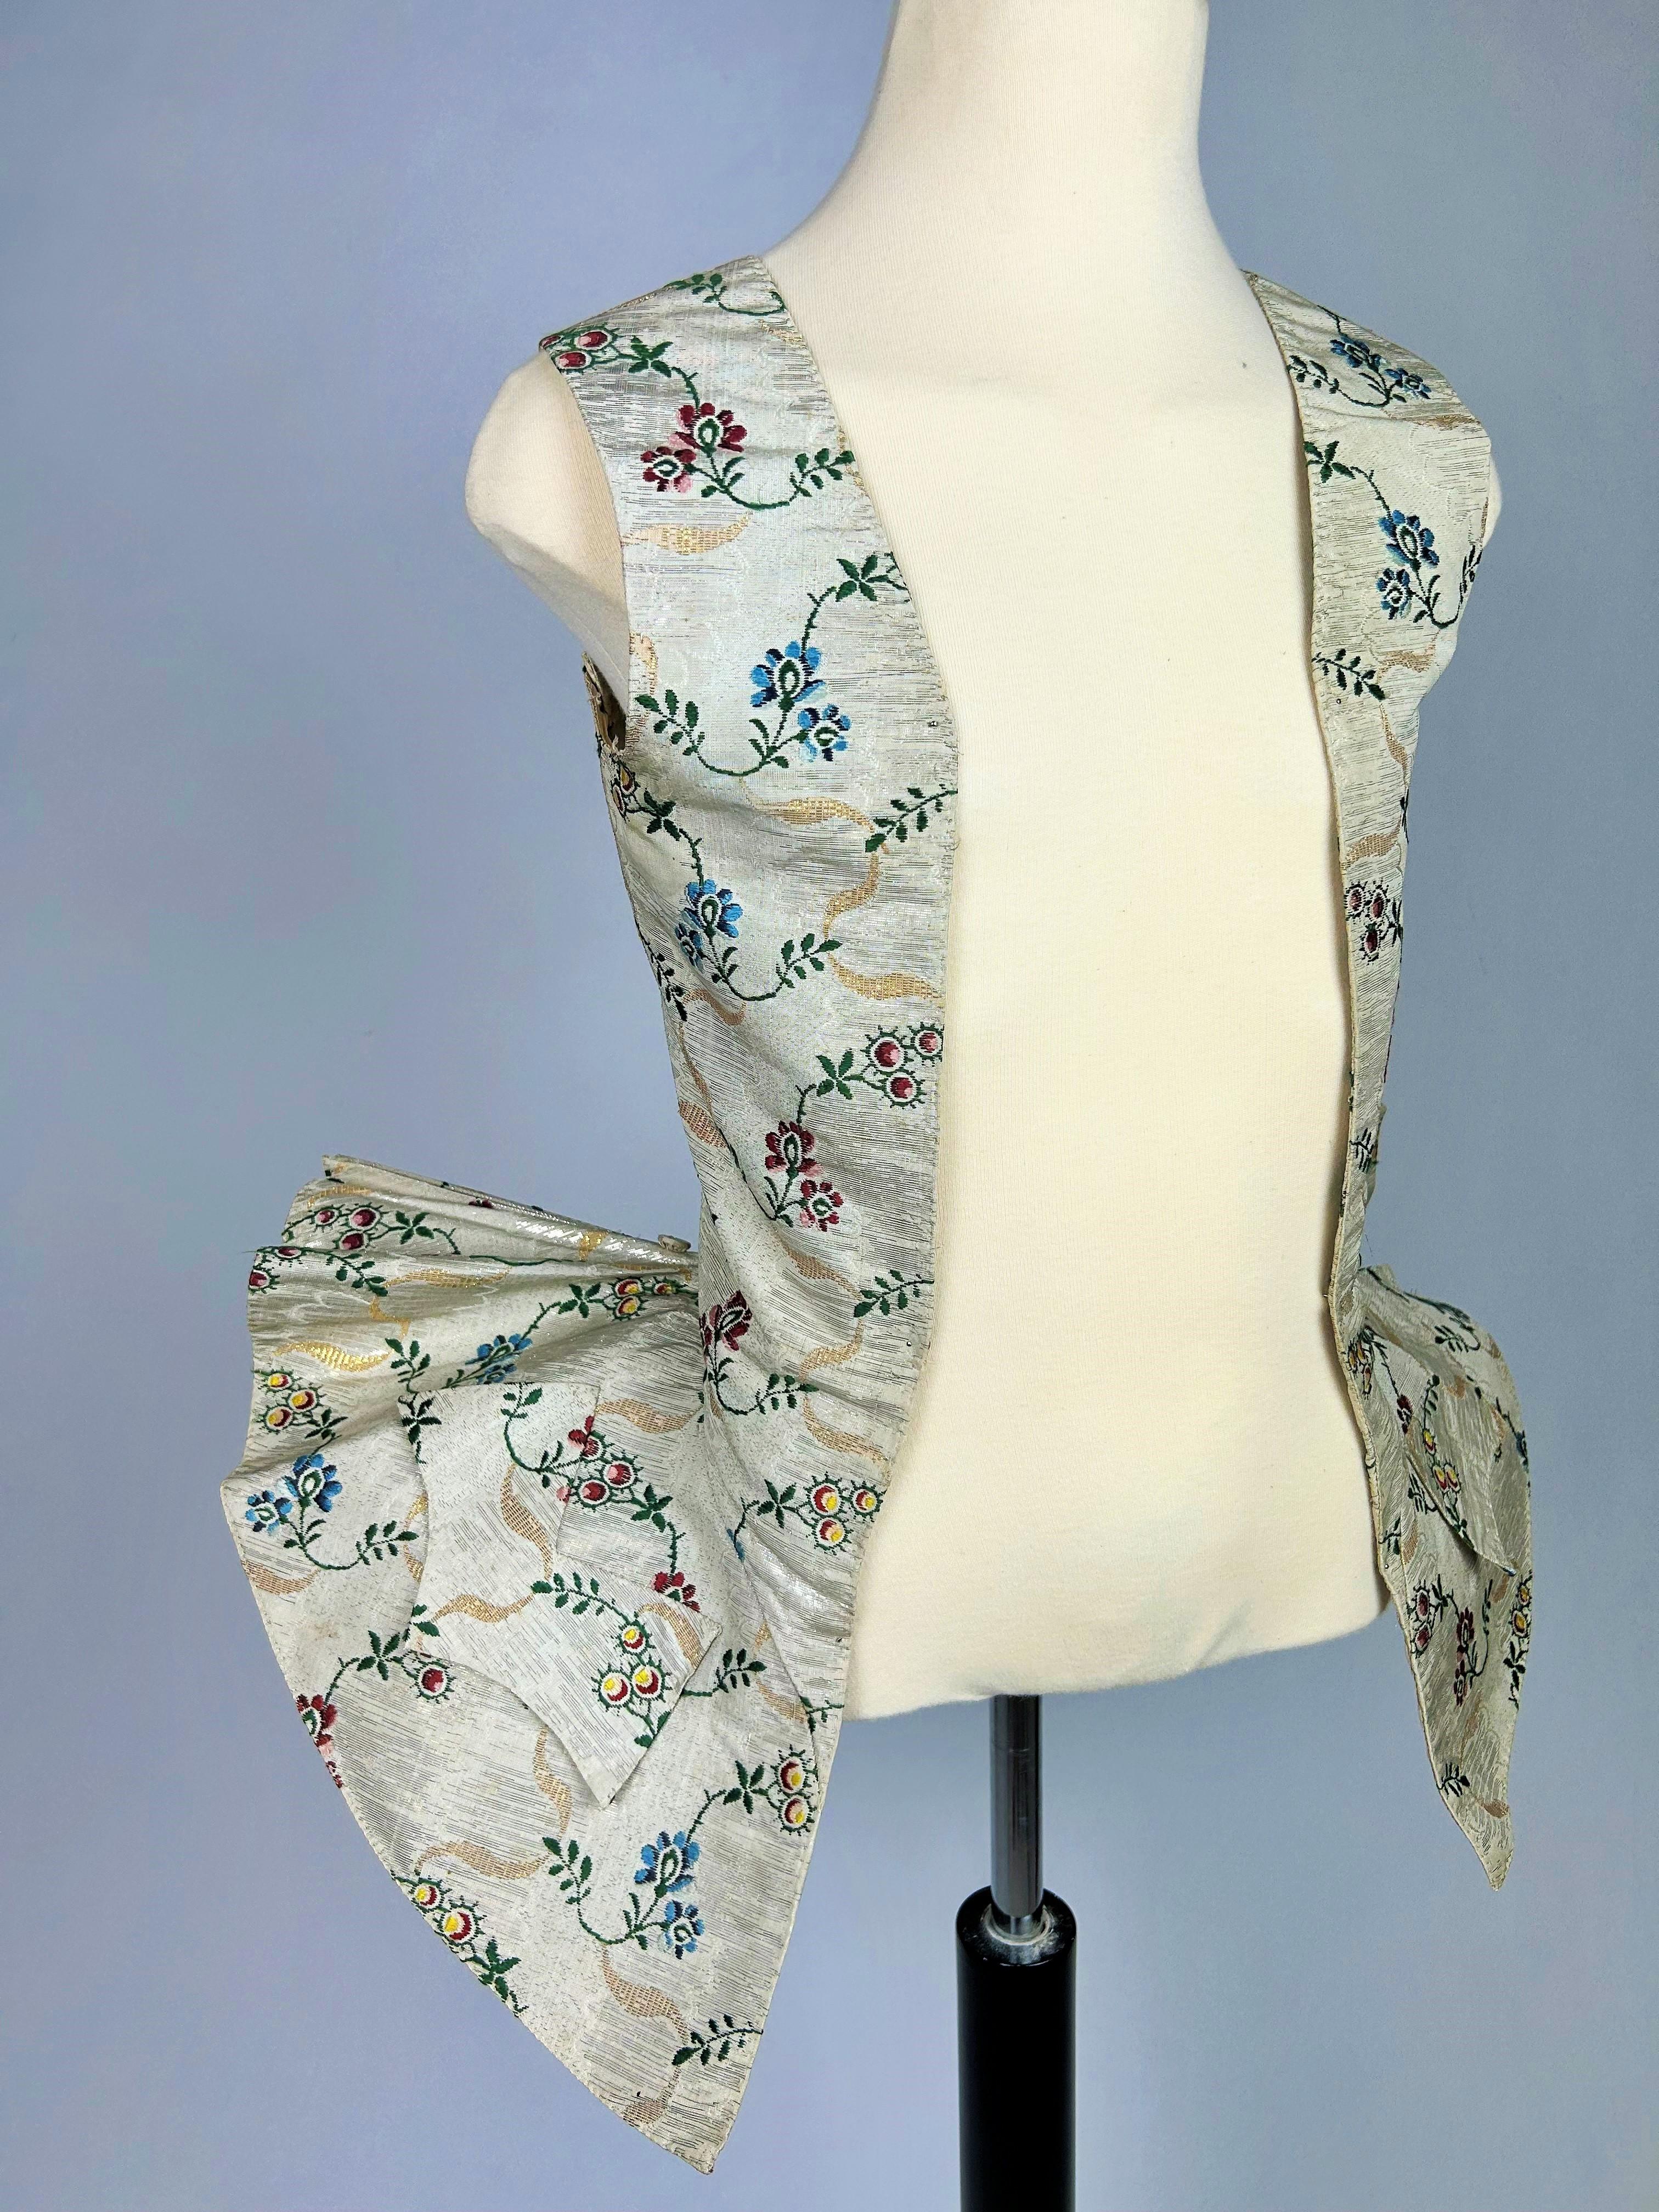 Amazon bodice in silver and gold lamé cloth - England or Europe Circa 1750-1760 For Sale 7